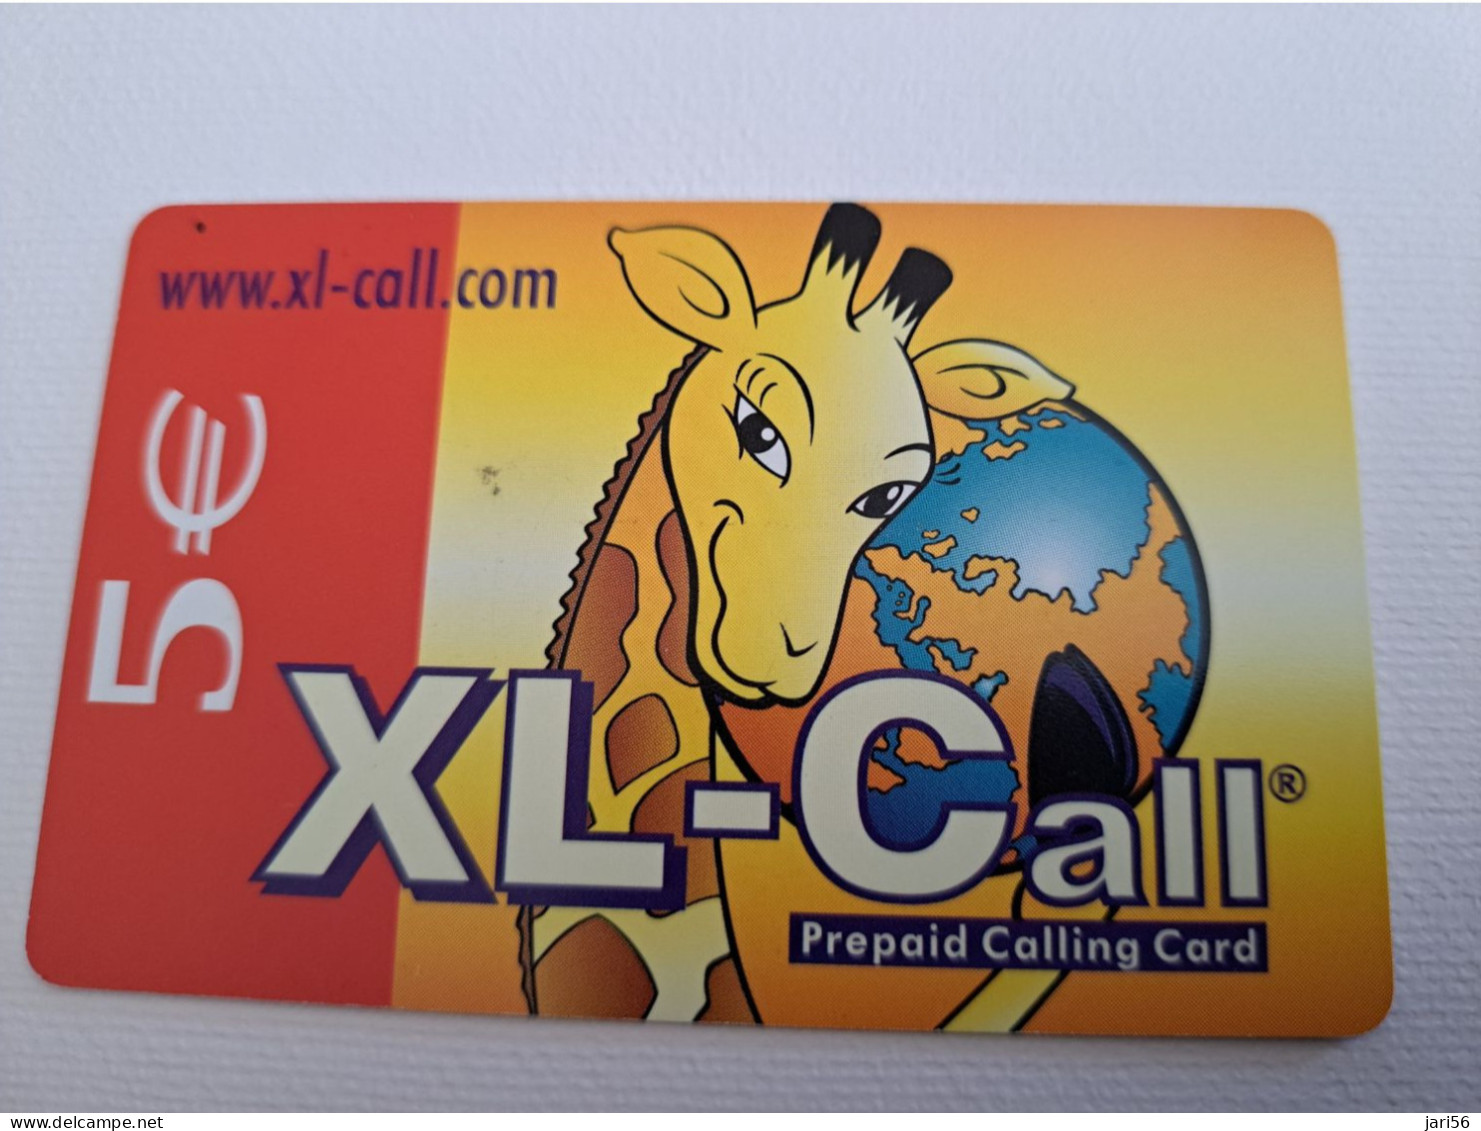 NETHERLANDS / PREPAID /€ 5,-,- / XL CALL/ GIRAFFE/ WITH GLOBE      /    - USED CARD  ** 15182** - Publiques